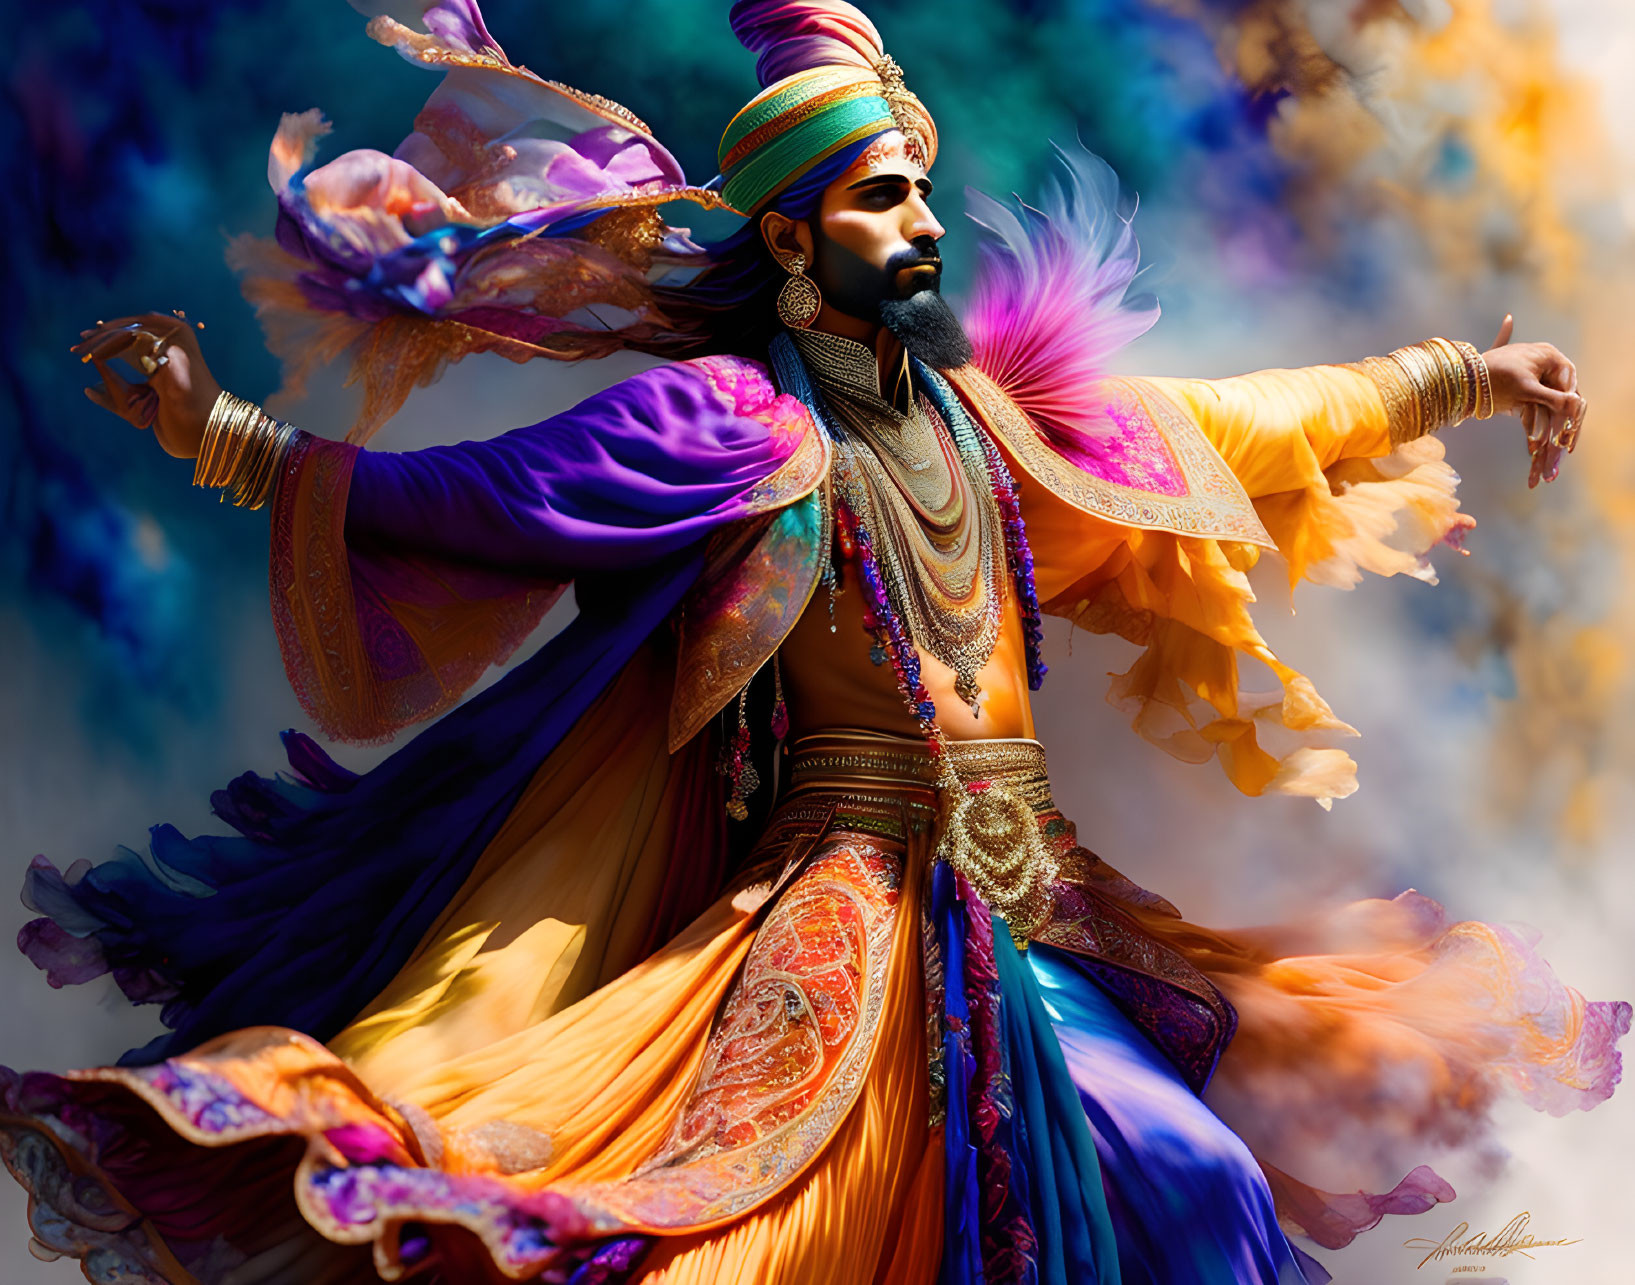 Colorfully dressed man dancing with swirling fabrics and jewelry on smoky background